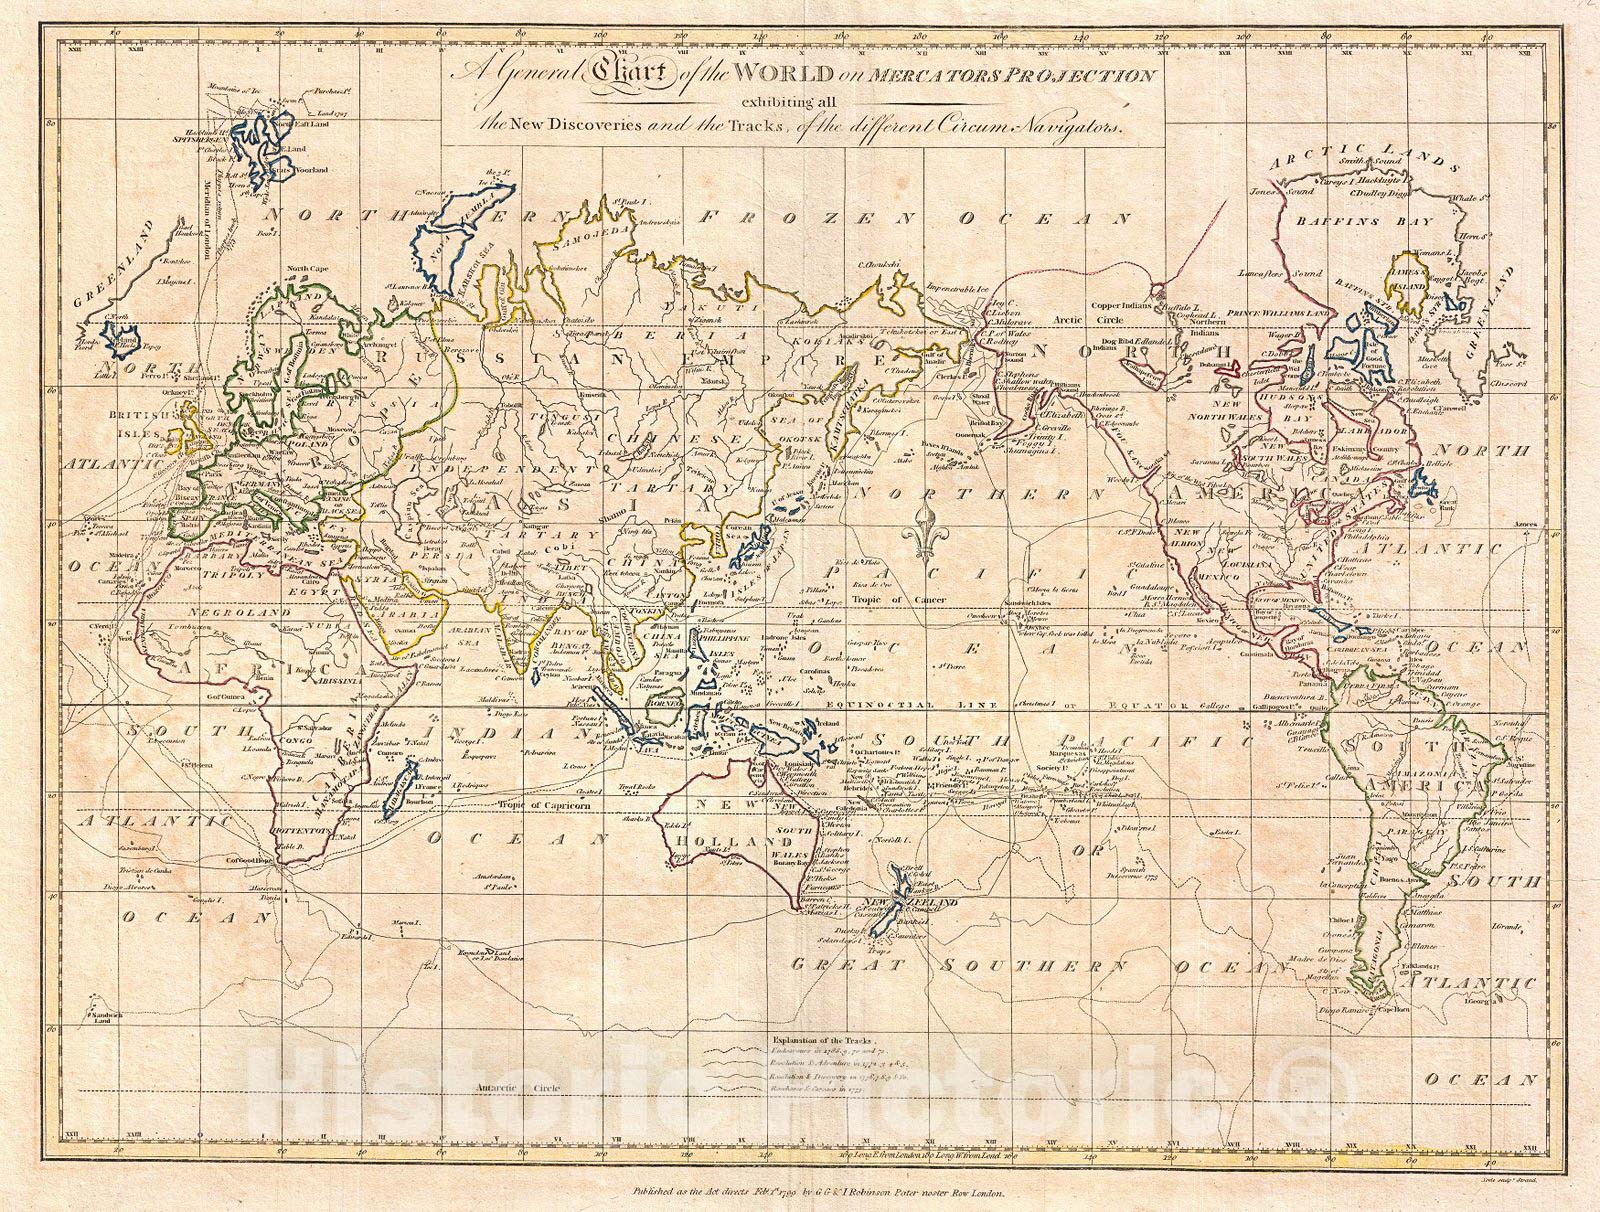 Historic Map : Cruttwell Map of The World on Mercator's Projection, 1799, Vintage Wall Art